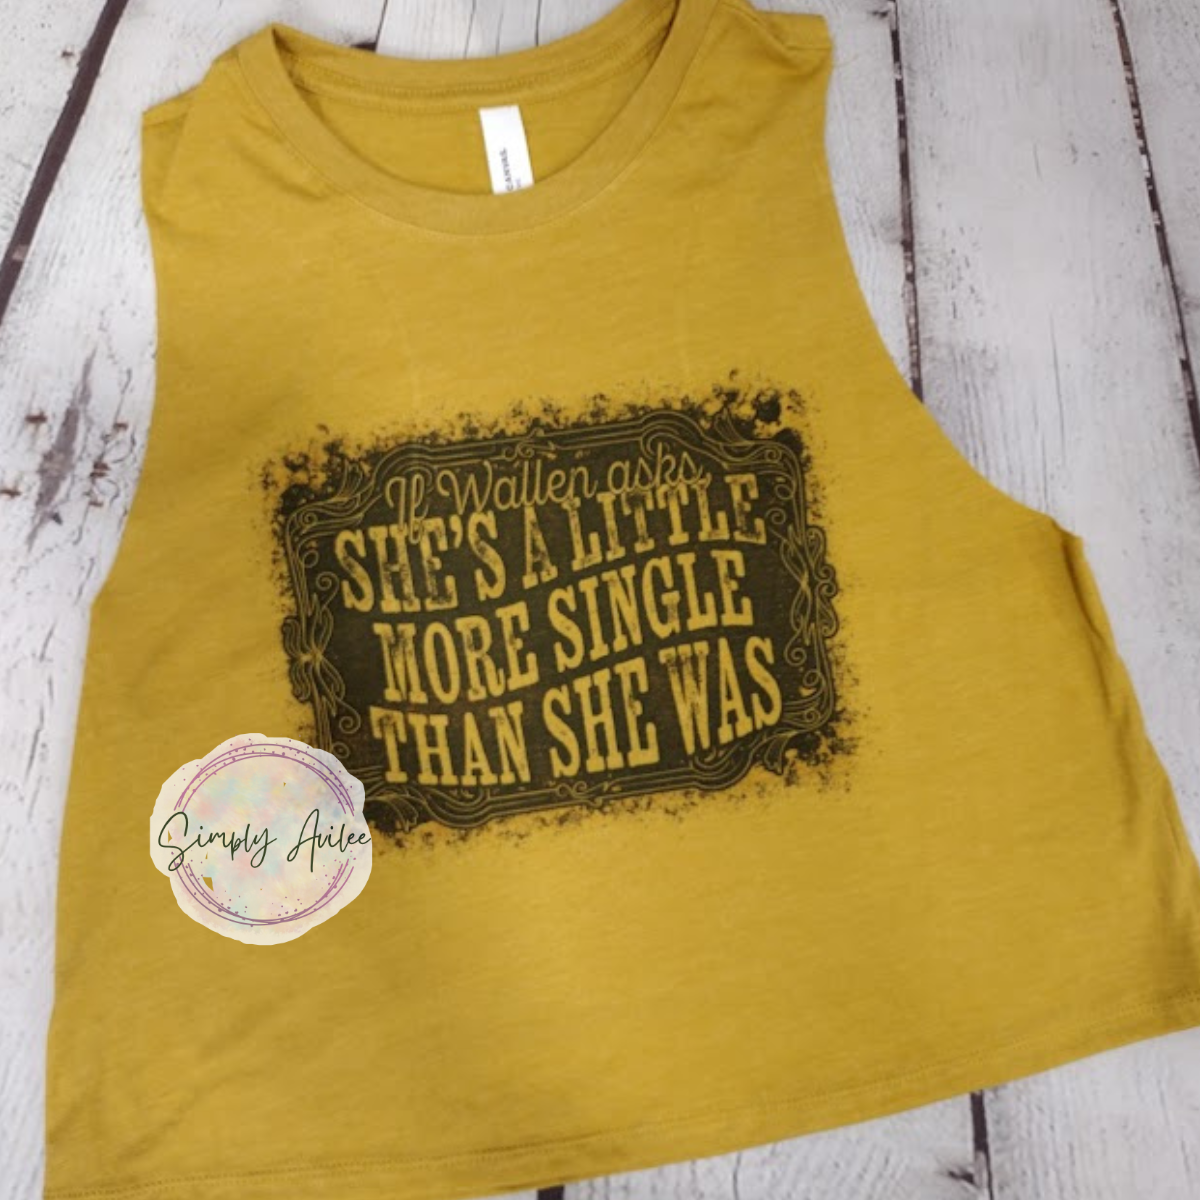 If Wallen Asks She’s a Little More Single Than She Was Tank/Cropped Tee